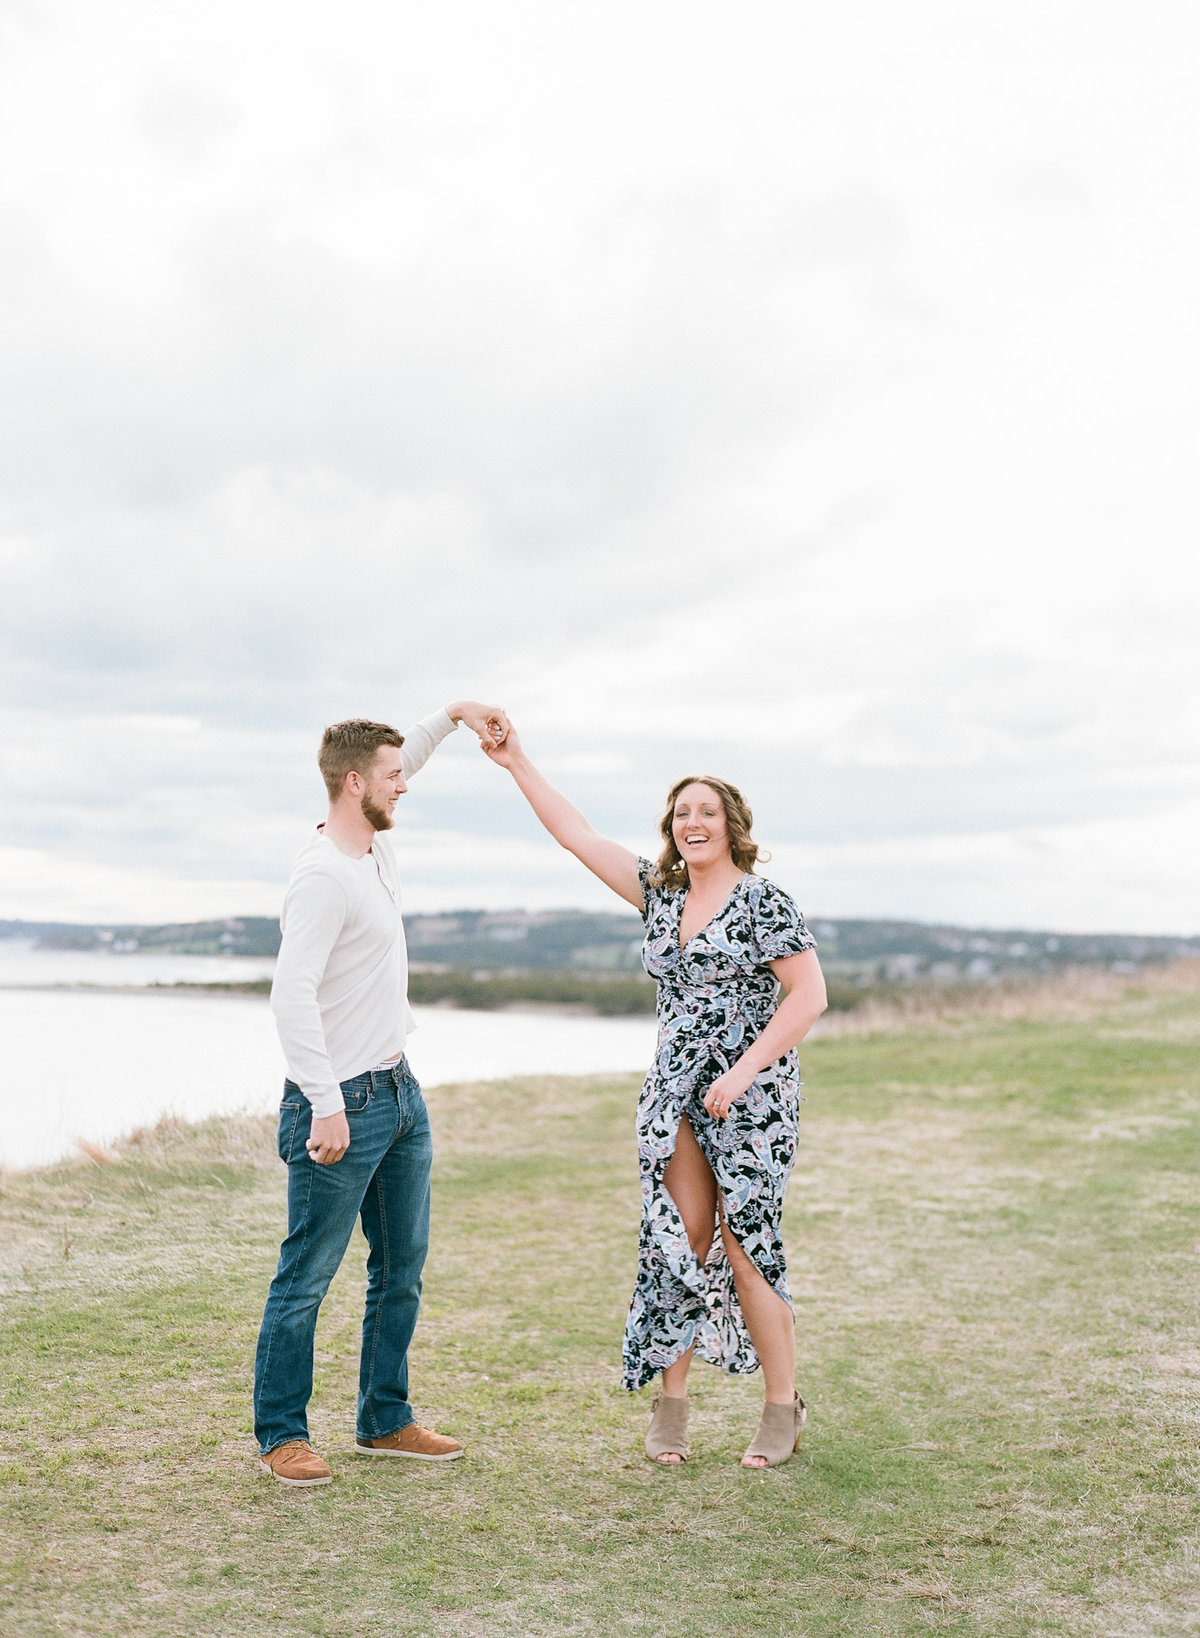 Jacqueline Anne Photography - Akayla and Andrew - Lawrencetown Beach-43